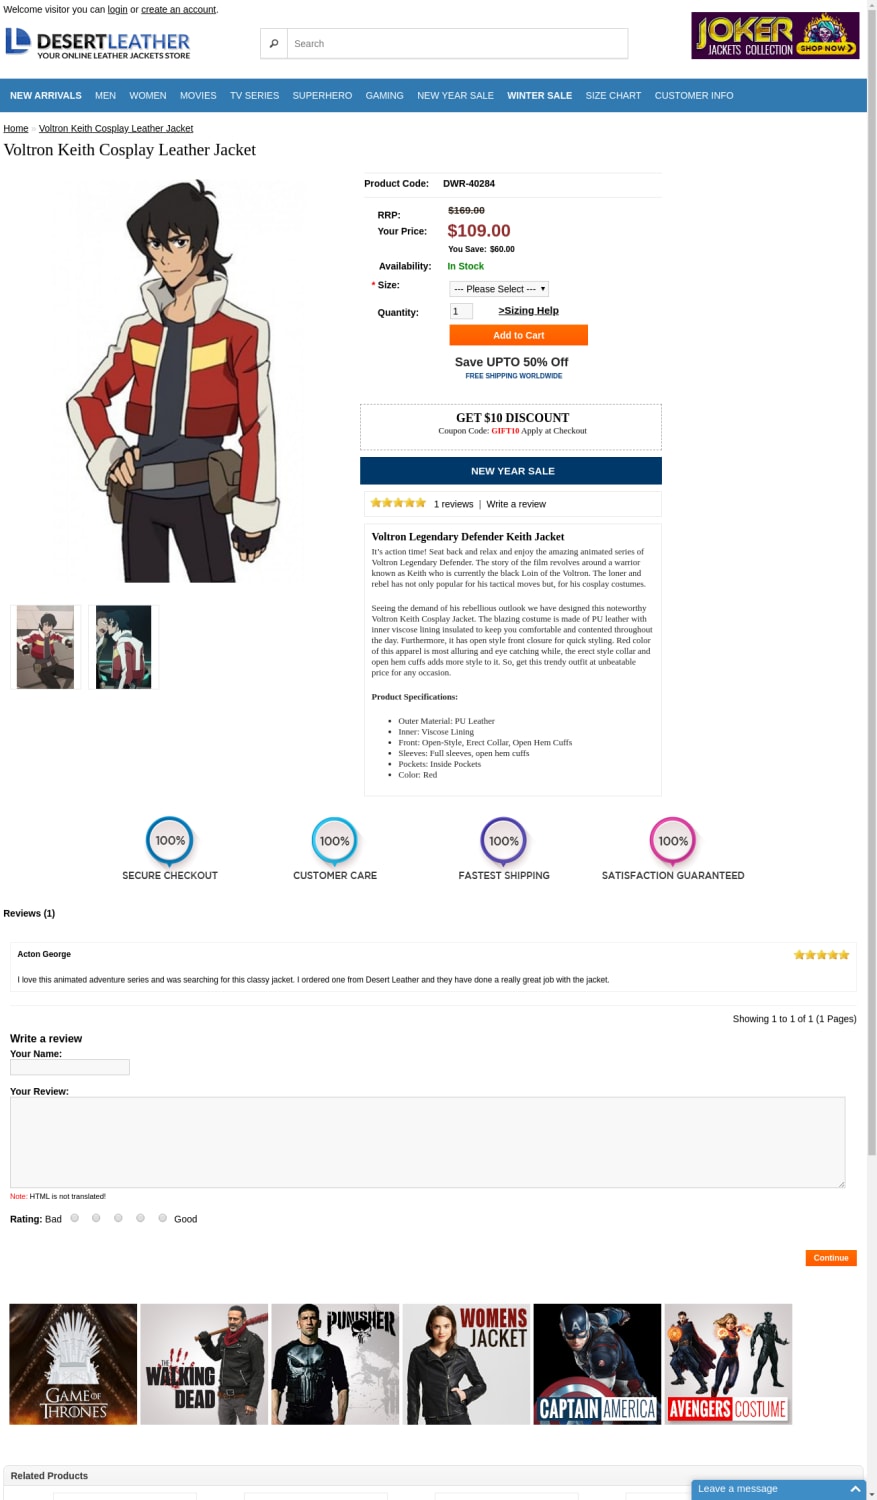 Voltron Keith Cosplay Leather Jacket